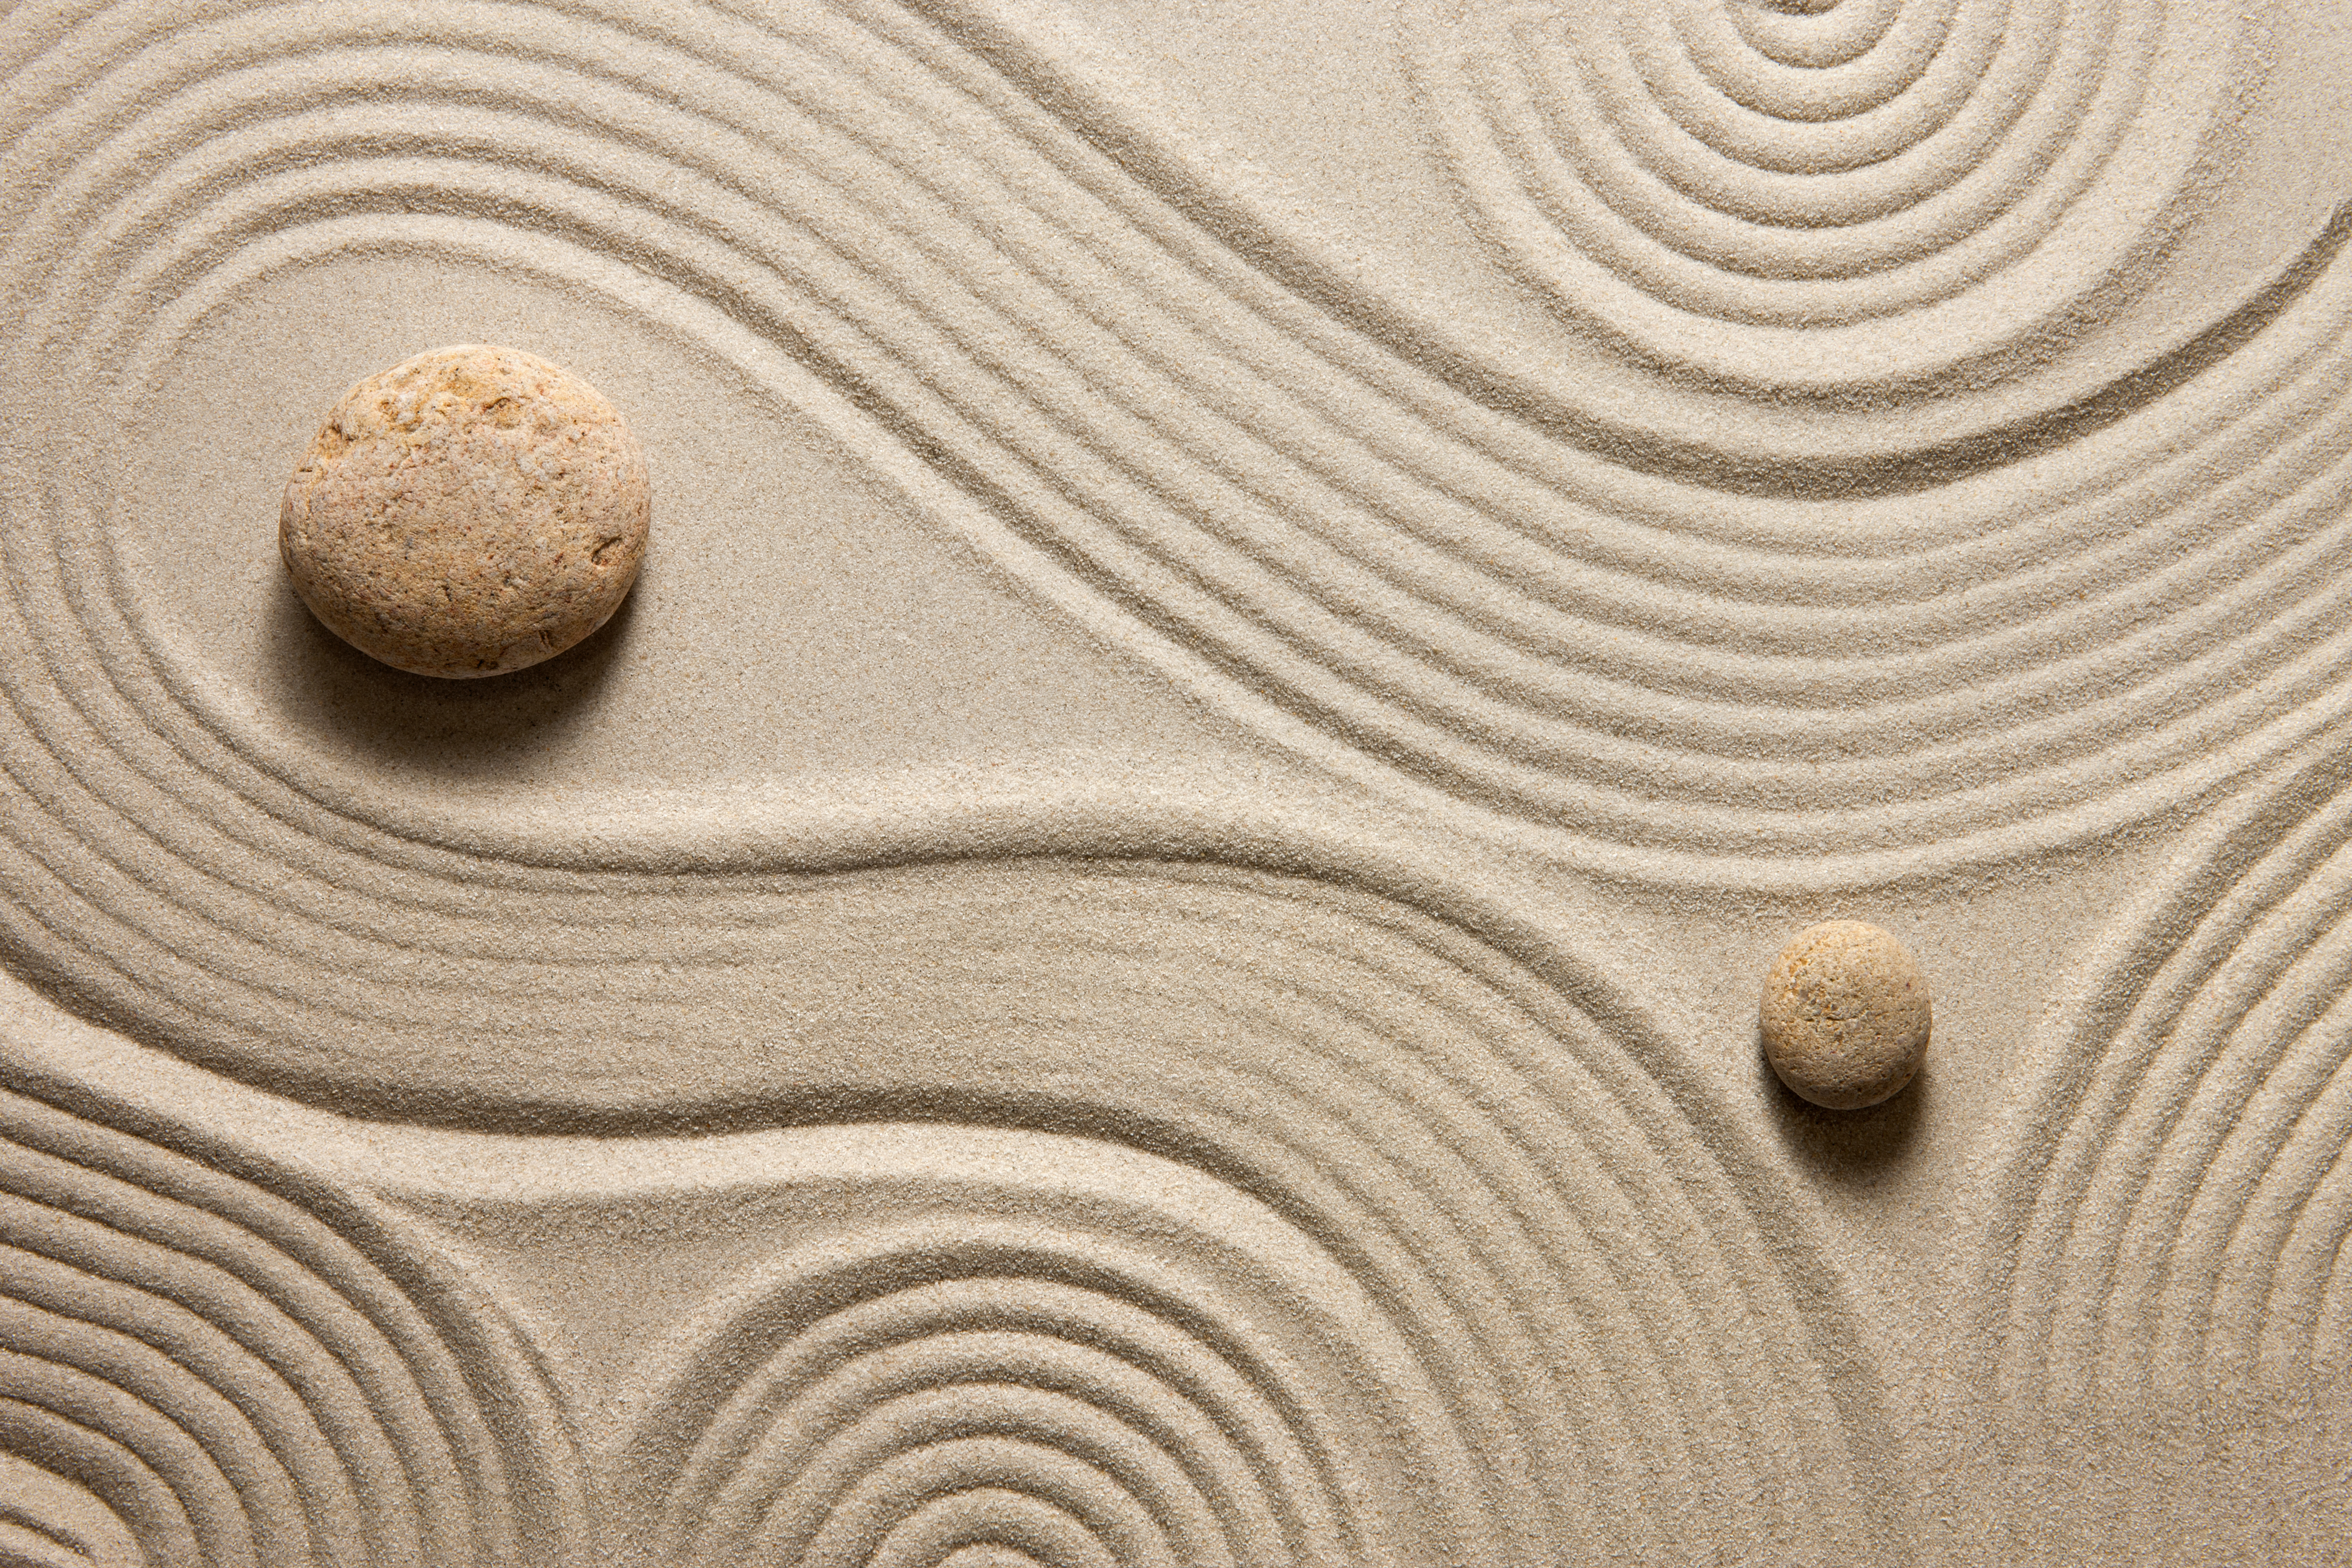 sand with two rocks